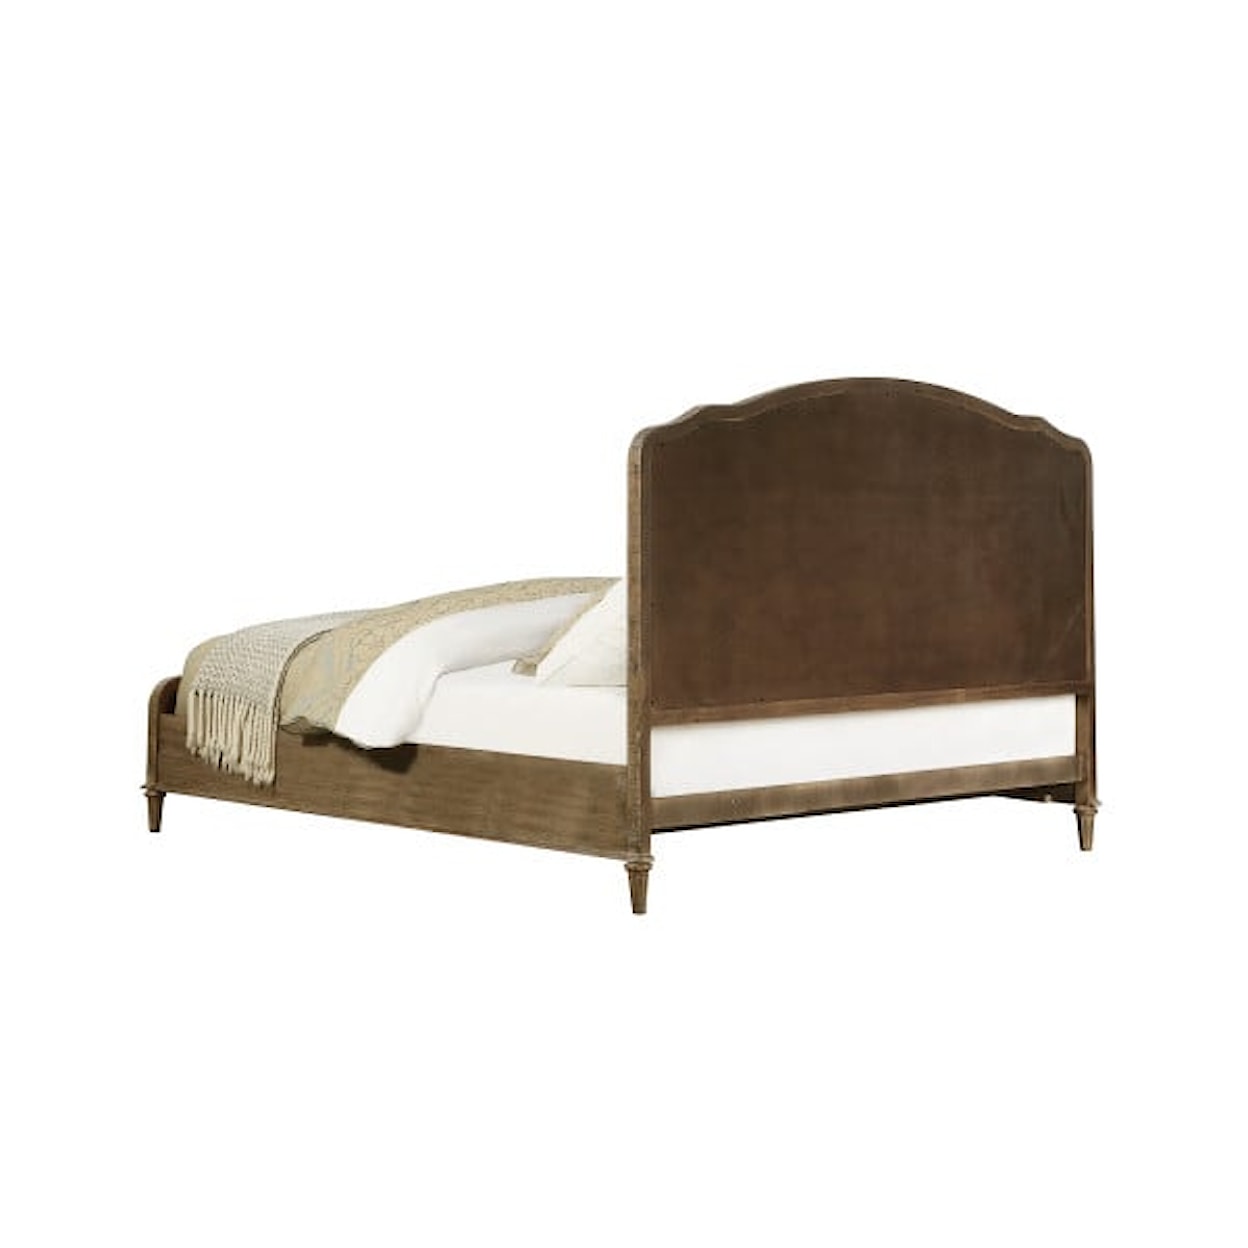 Emerald Interlude Queen Arched Panel Bed with Upholstery